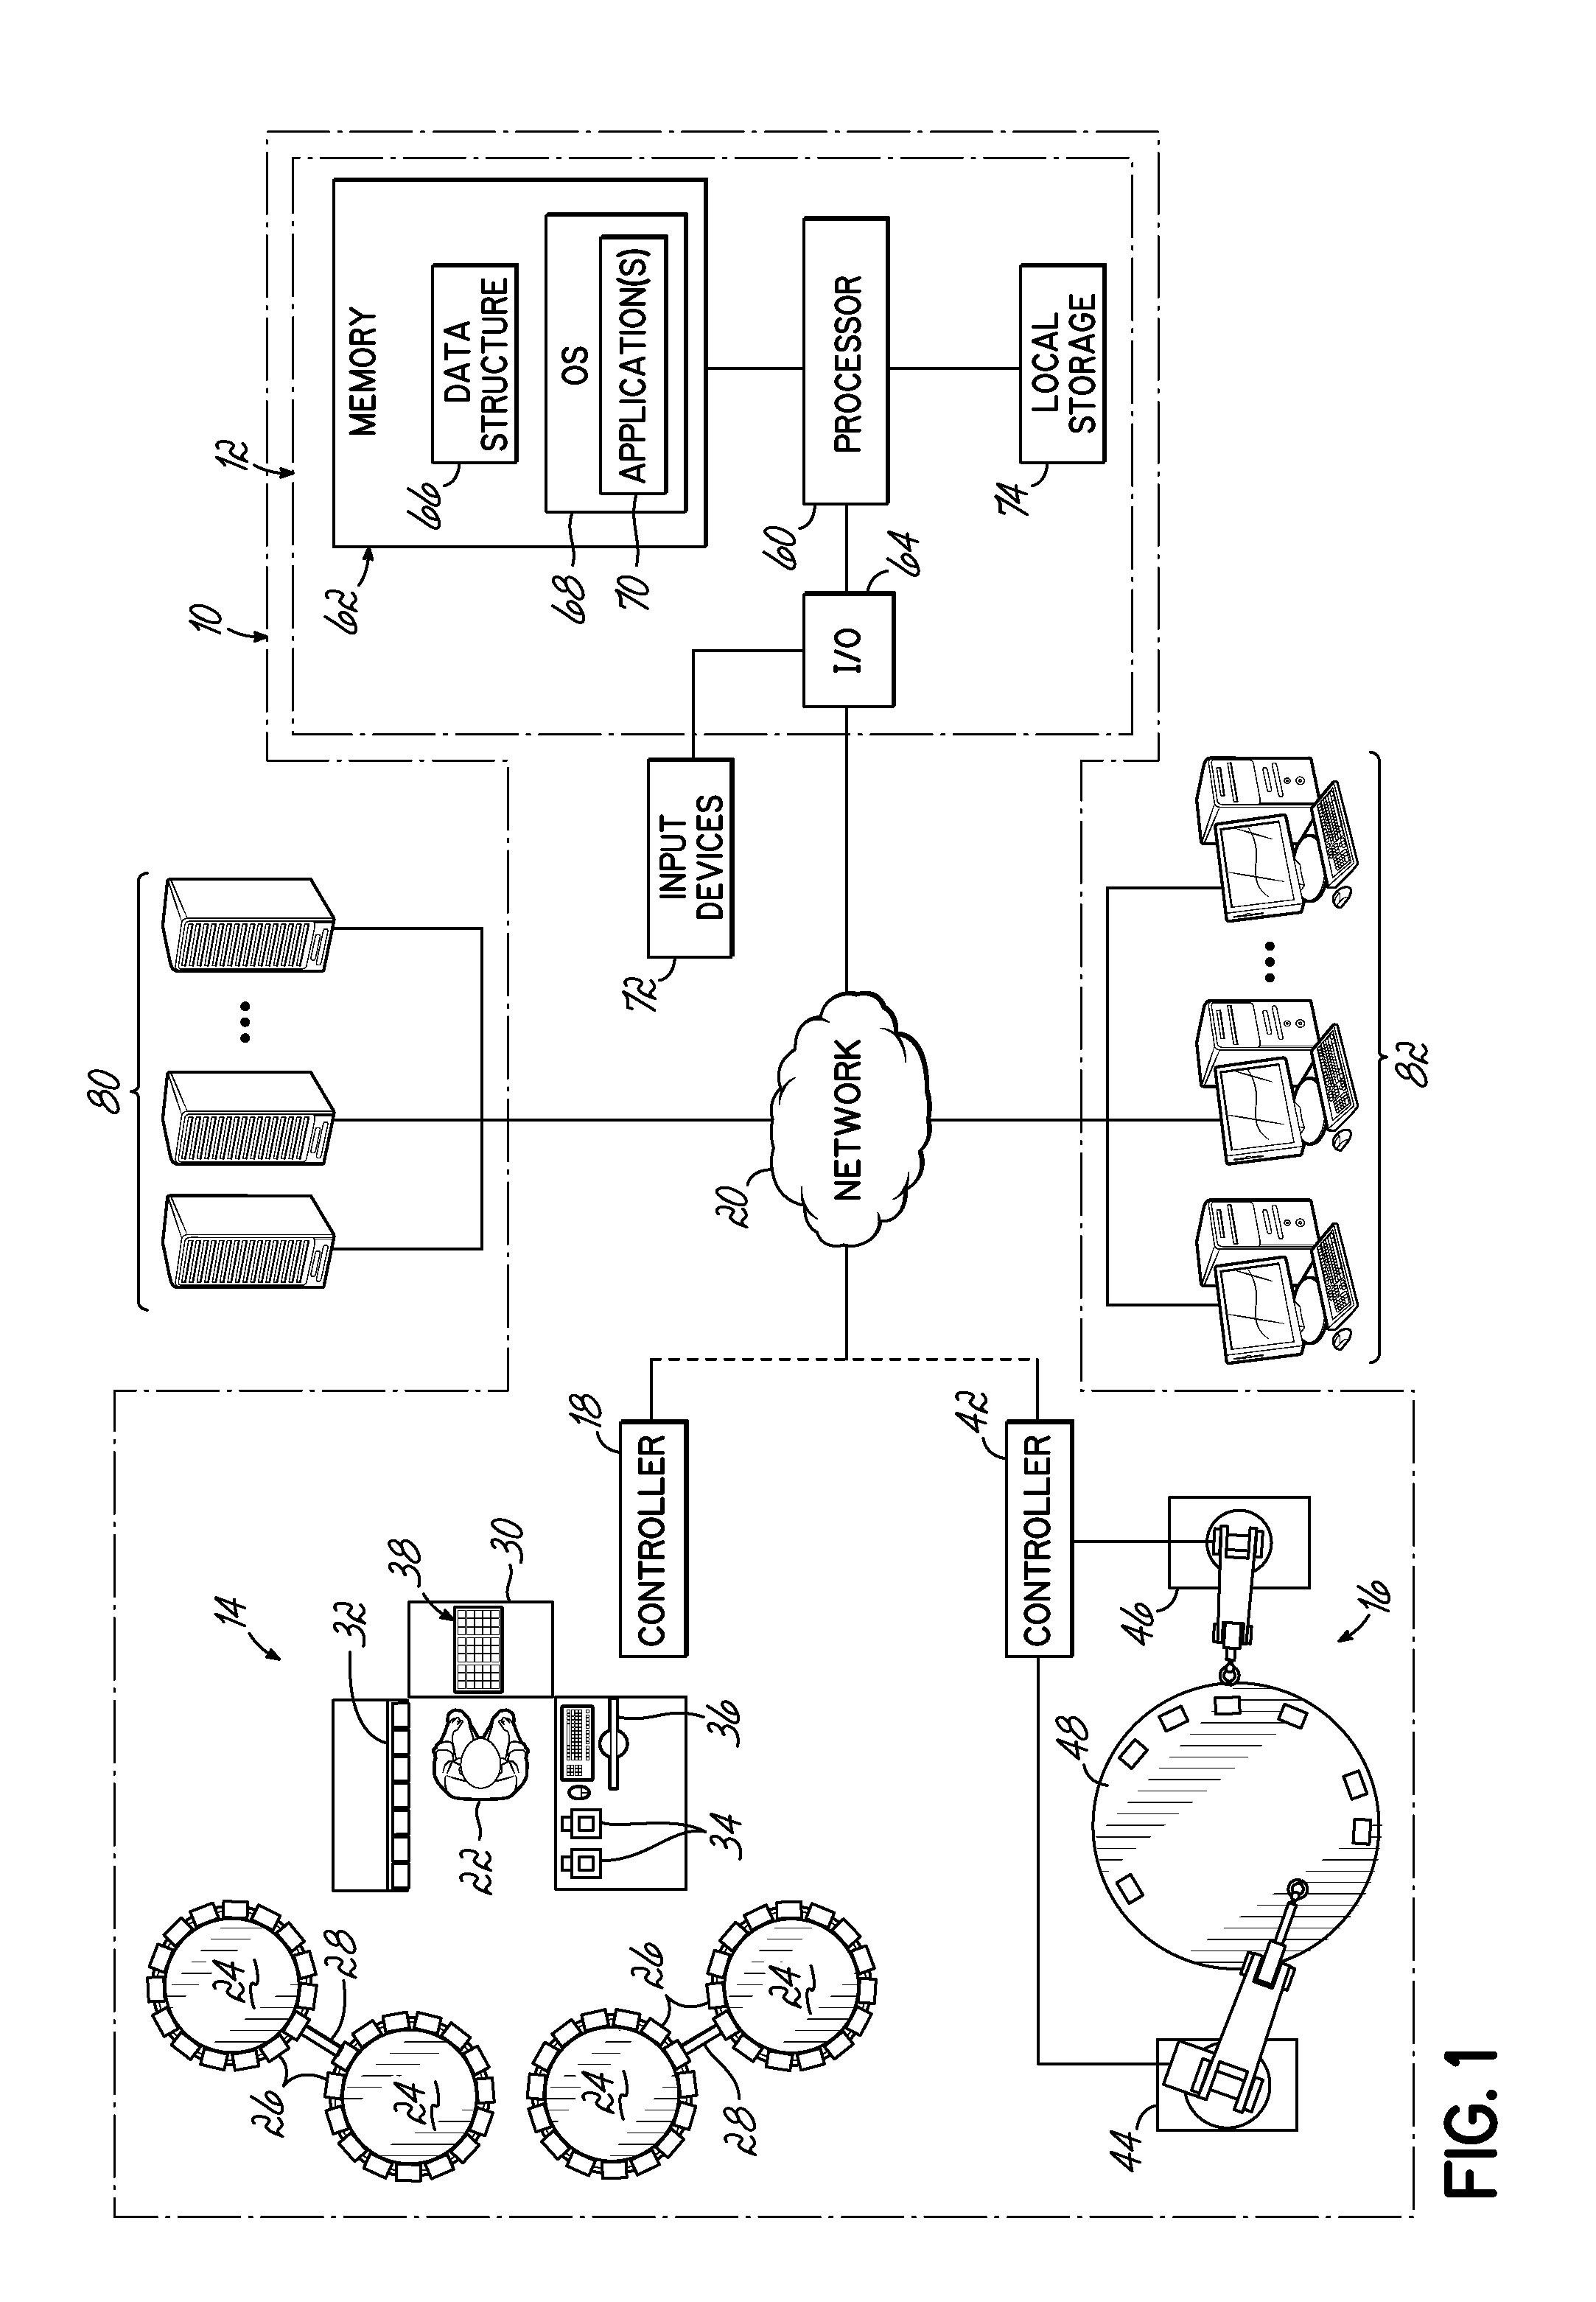 Methods and apparatus for automated filling of packagings with medications